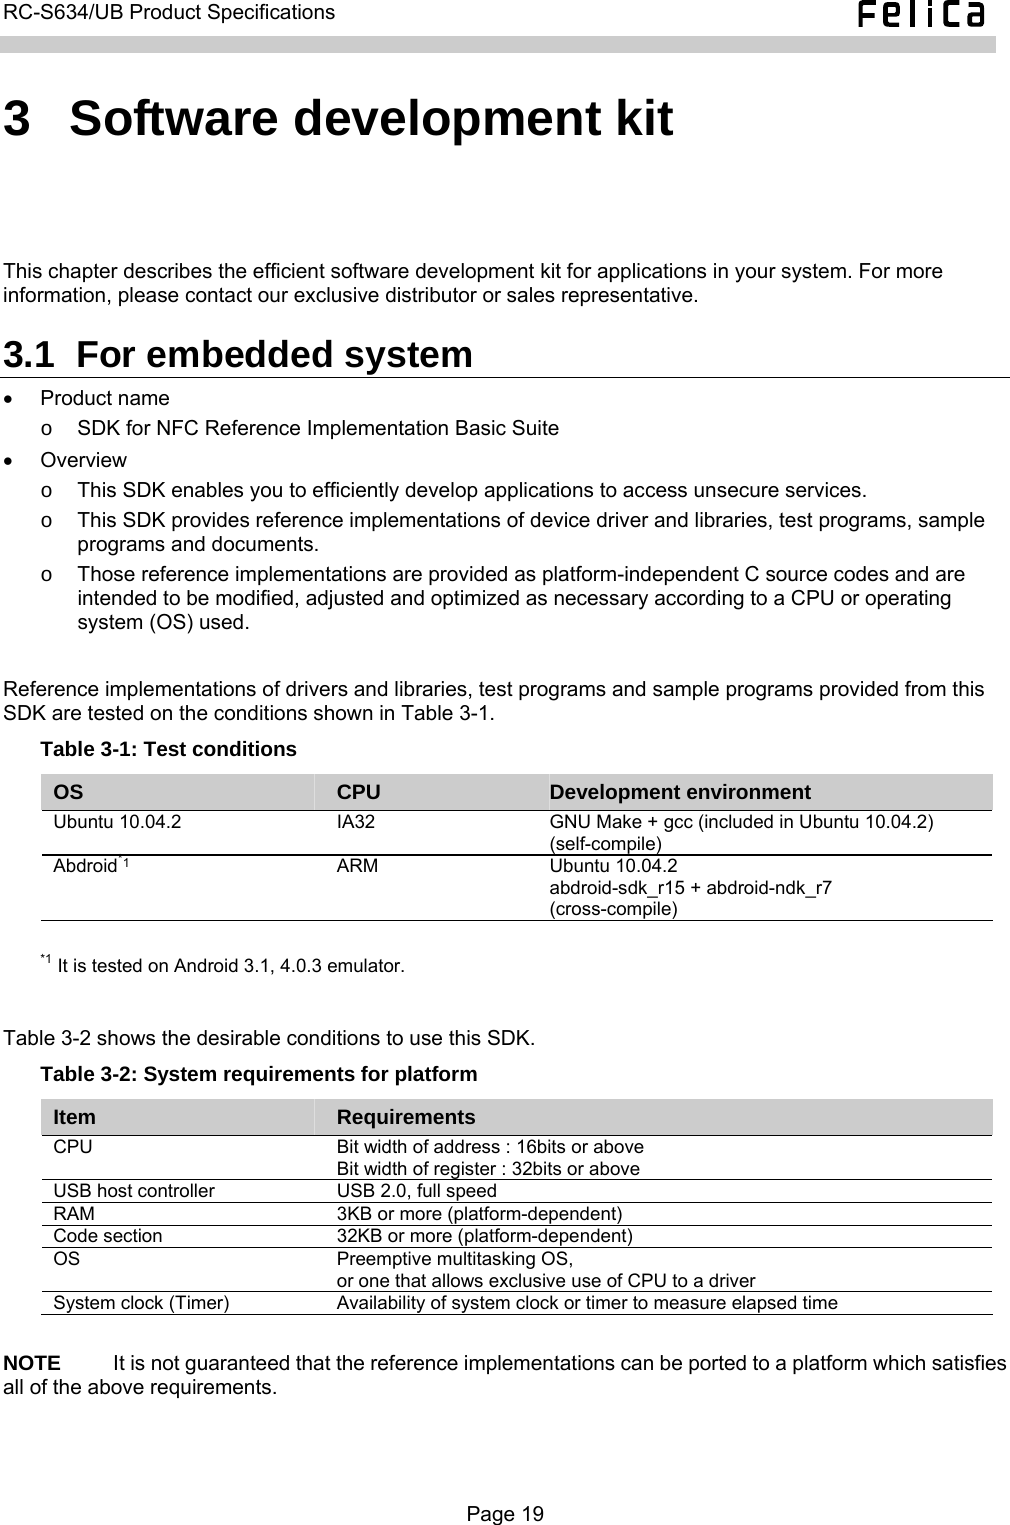   RC-S634/UB Product Specifications  3  Software development kit This chapter describes the efficient software development kit for applications in your system. For more information, please contact our exclusive distributor or sales representative. 3.1  For embedded system • Product name o  SDK for NFC Reference Implementation Basic Suite • Overview  o  This SDK enables you to efficiently develop applications to access unsecure services. o  This SDK provides reference implementations of device driver and libraries, test programs, sample programs and documents. o  Those reference implementations are provided as platform-independent C source codes and are intended to be modified, adjusted and optimized as necessary according to a CPU or operating system (OS) used.  Reference implementations of drivers and libraries, test programs and sample programs provided from this SDK are tested on the conditions shown in Table 3-1. Table 3-1: Test conditions OS  CPU  Development environment Ubuntu 10.04.2  IA32  GNU Make + gcc (included in Ubuntu 10.04.2) (self-compile) Abdroid*1 ARM Ubuntu 10.04.2 abdroid-sdk_r15 + abdroid-ndk_r7 (cross-compile)  *1 It is tested on Android 3.1, 4.0.3 emulator.  Table 3-2 shows the desirable conditions to use this SDK. Table 3-2: System requirements for platform Item  Requirements CPU    Bit width of address : 16bits or above Bit width of register : 32bits or above USB host controller  USB 2.0, full speed RAM  3KB or more (platform-dependent) Code section  32KB or more (platform-dependent) OS  Preemptive multitasking OS, or one that allows exclusive use of CPU to a driver System clock (Timer)  Availability of system clock or timer to measure elapsed time  NOTE     It is not guaranteed that the reference implementations can be ported to a platform which satisfies all of the above requirements.  Page 19  